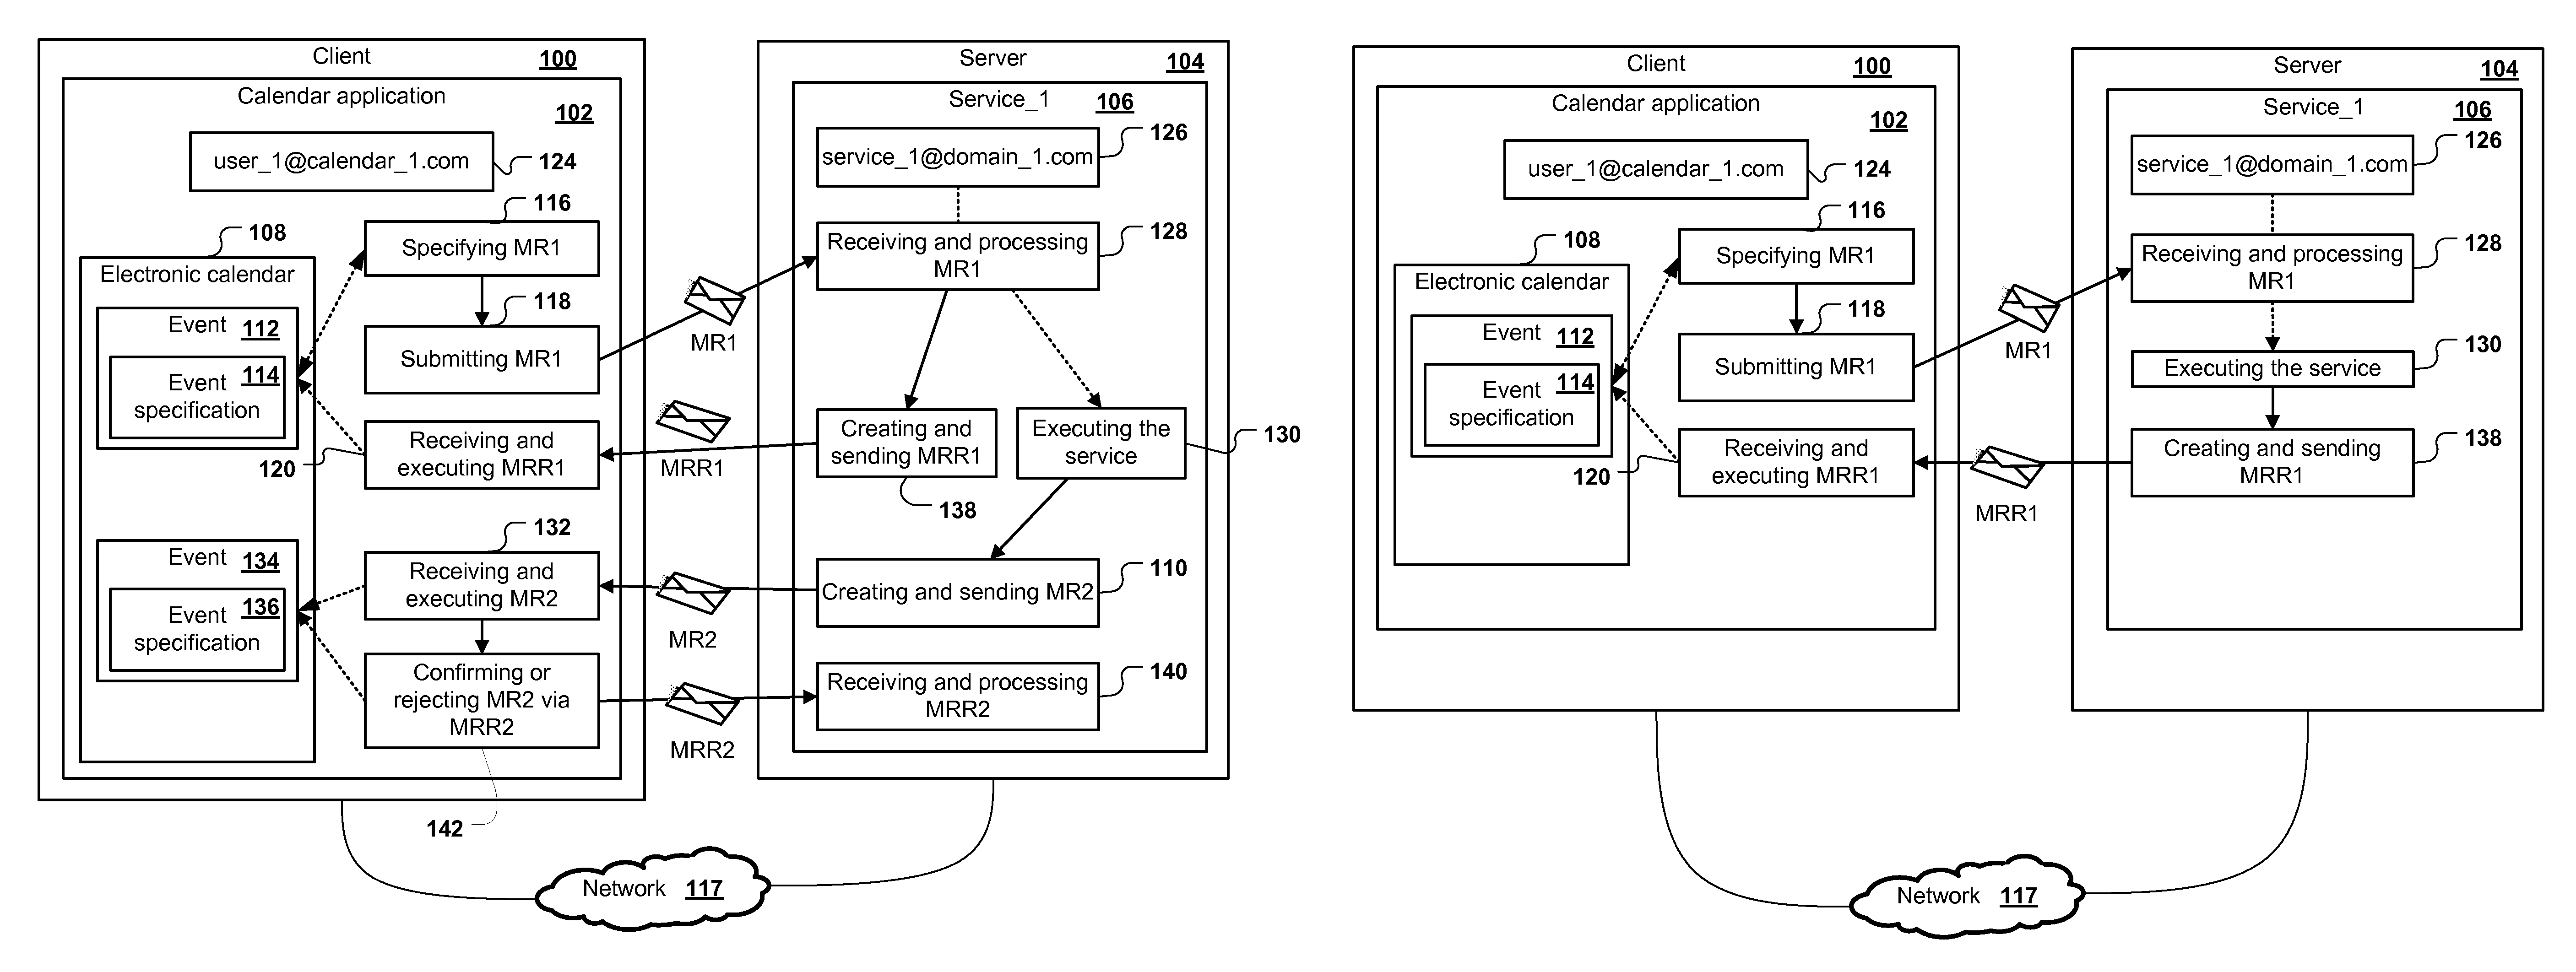 Computer implemented method for integrating services in a calendar application via meeting request e-mails